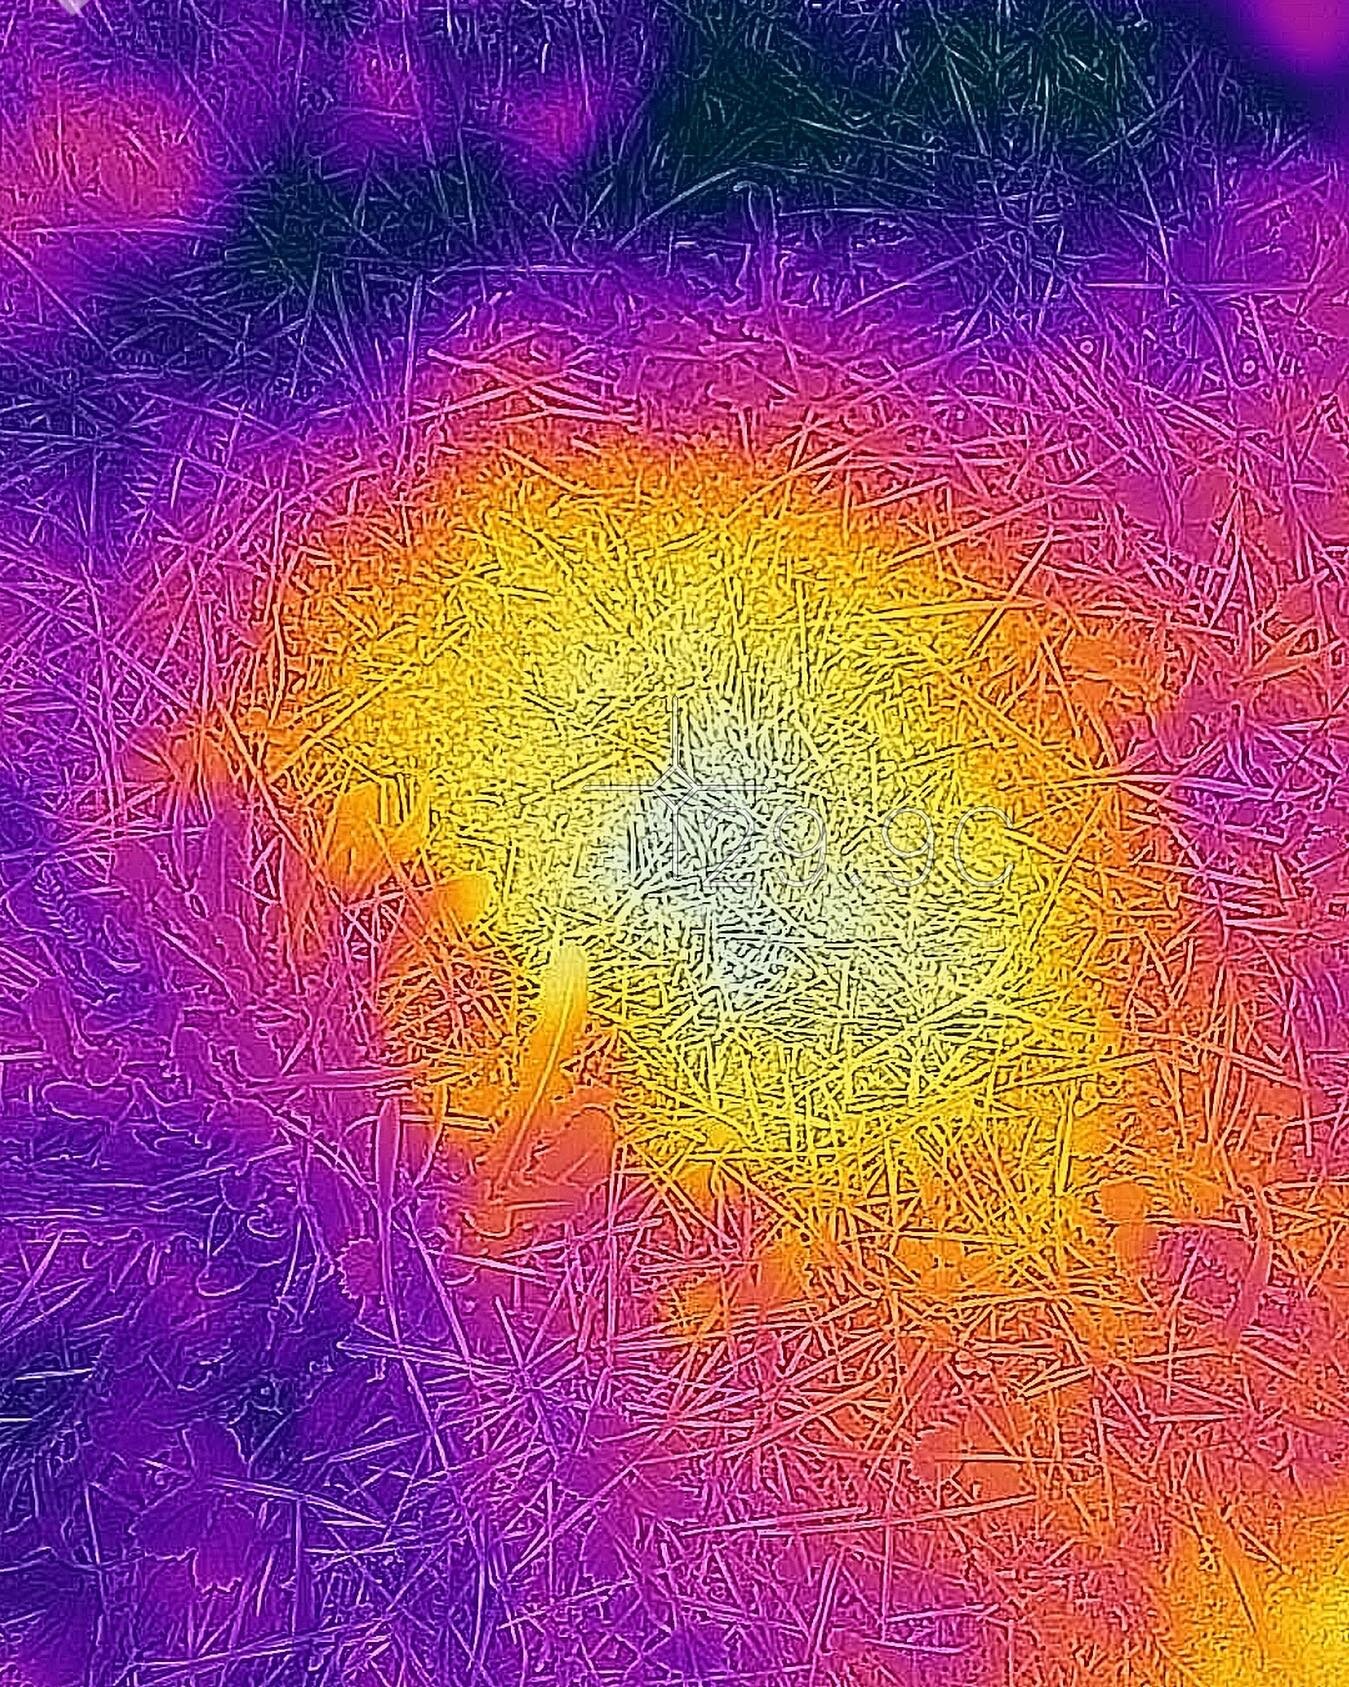 Ant mound at the elevation of 4100 ft at 9 am. Metabolic heat and the well-insulated thatched keep them warm in the morning. #flirone #thermalecology